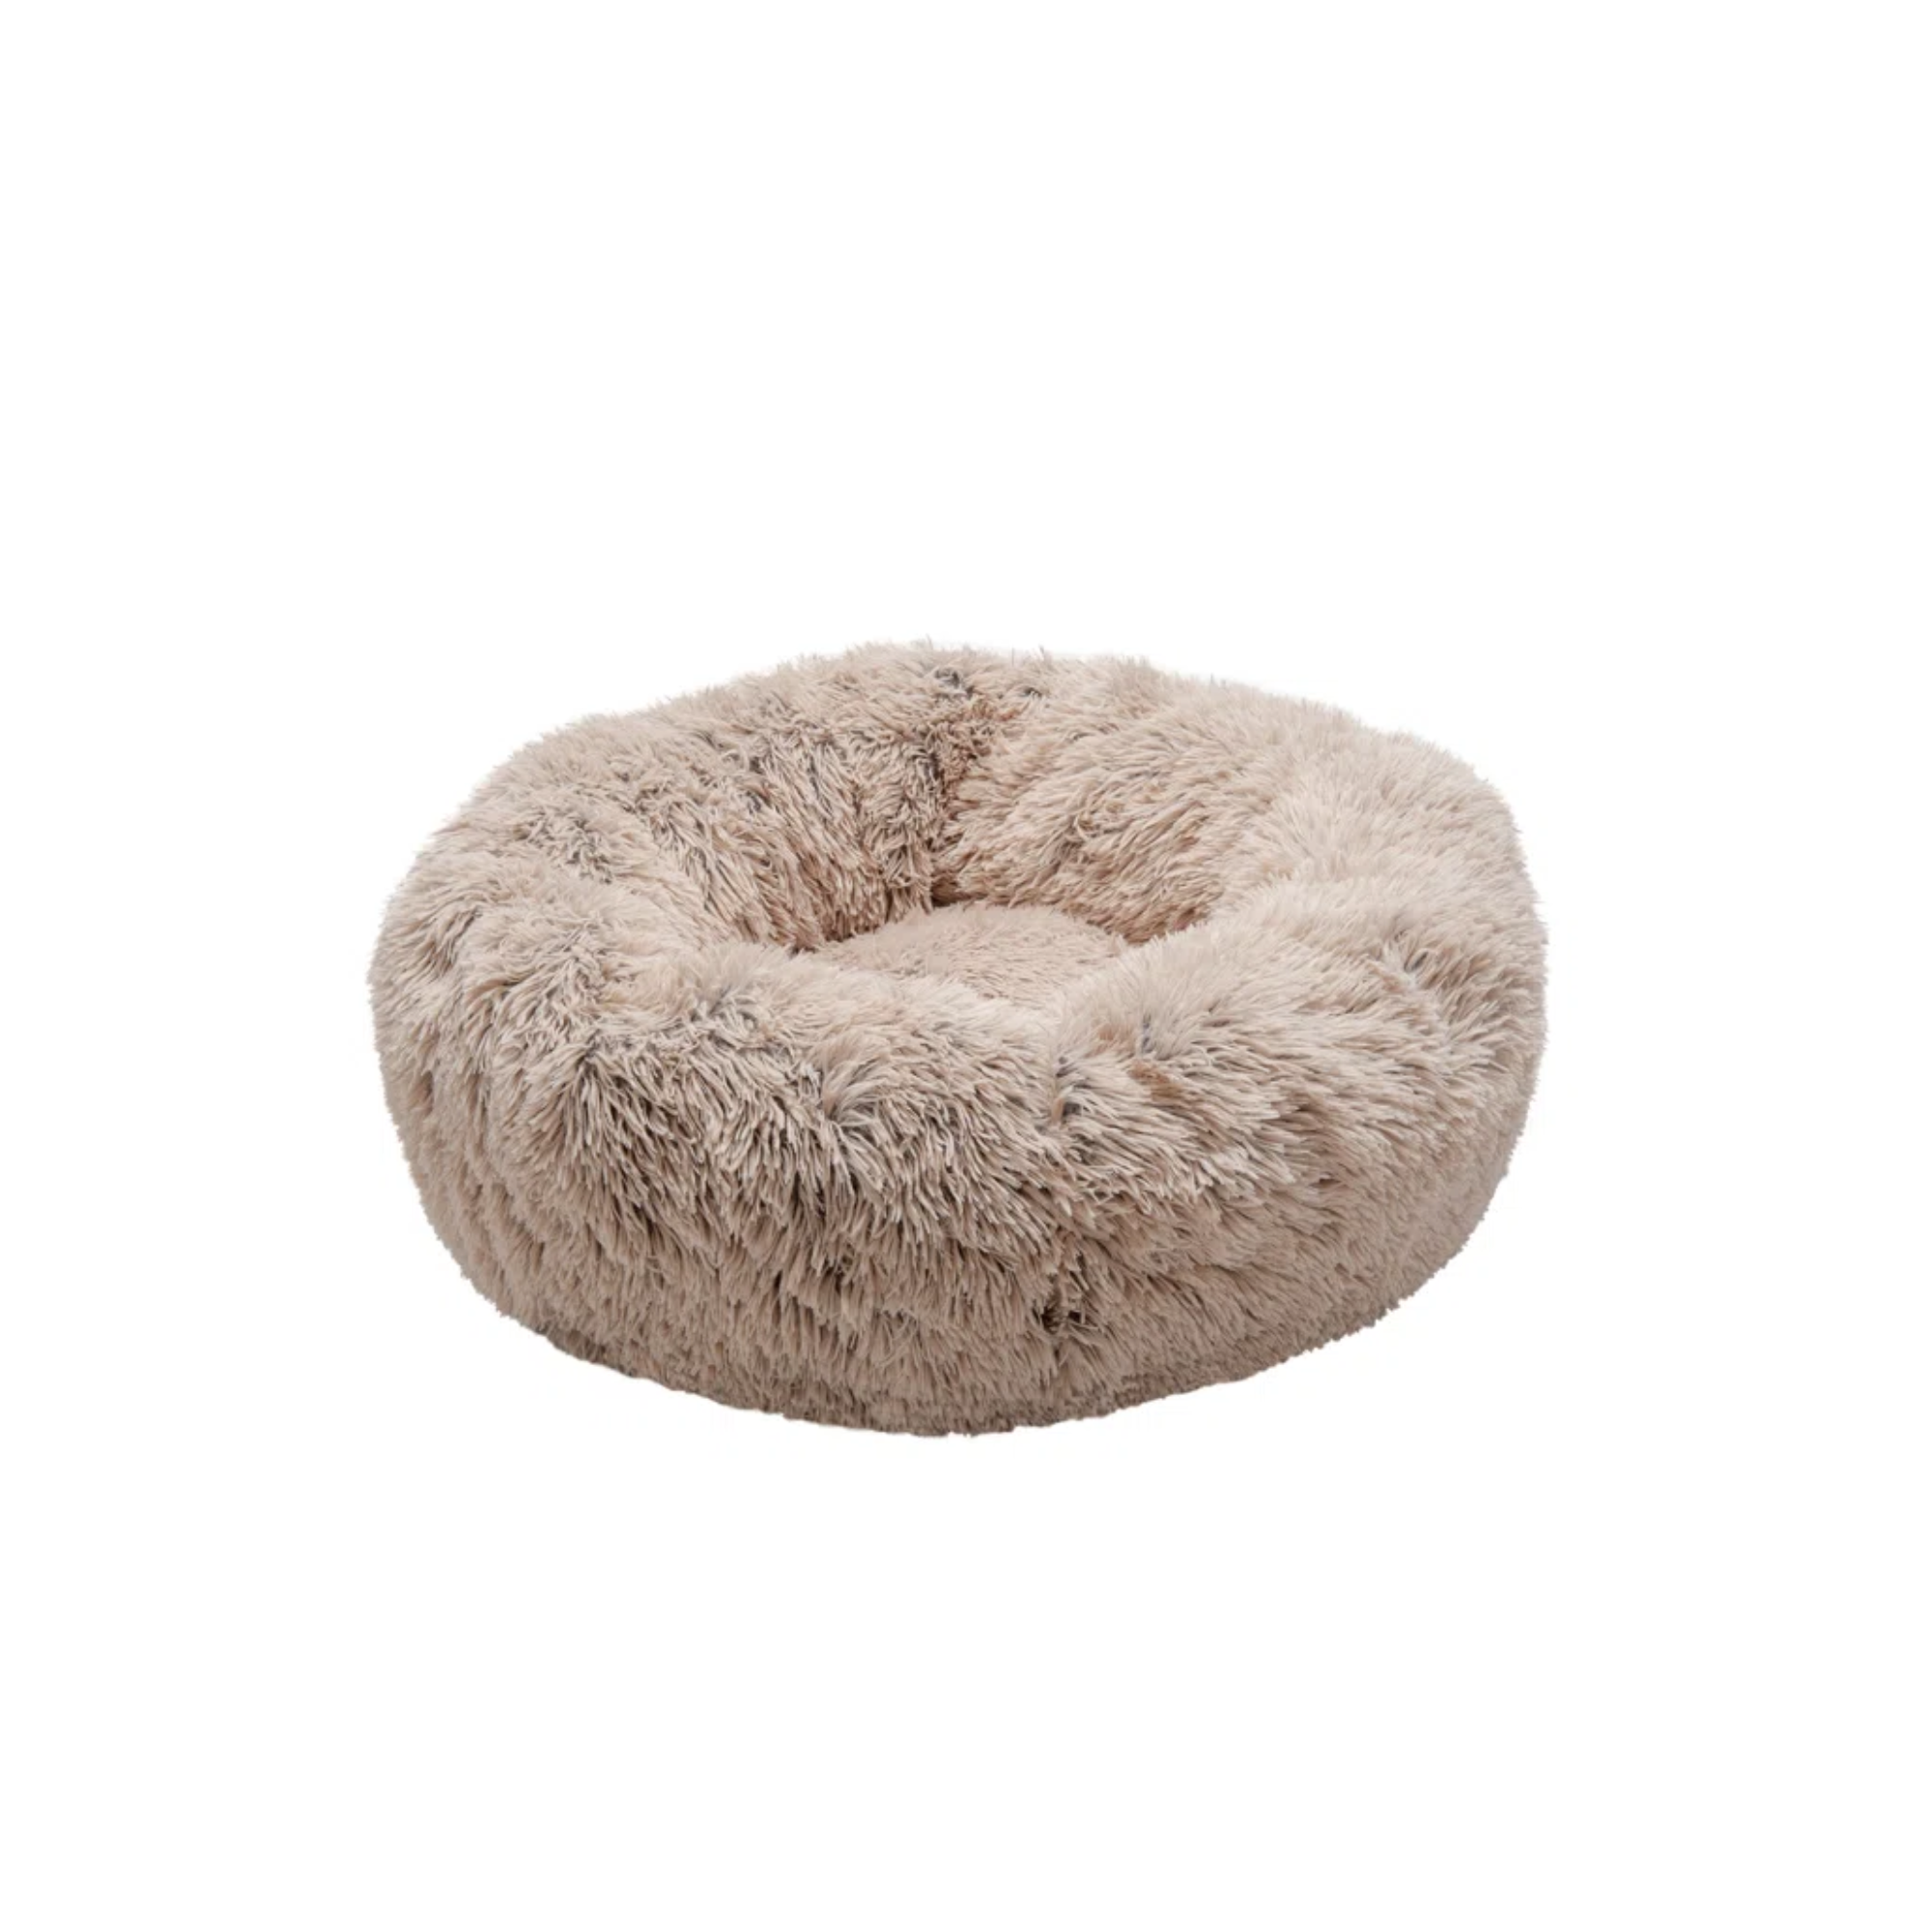 A donut dog bed